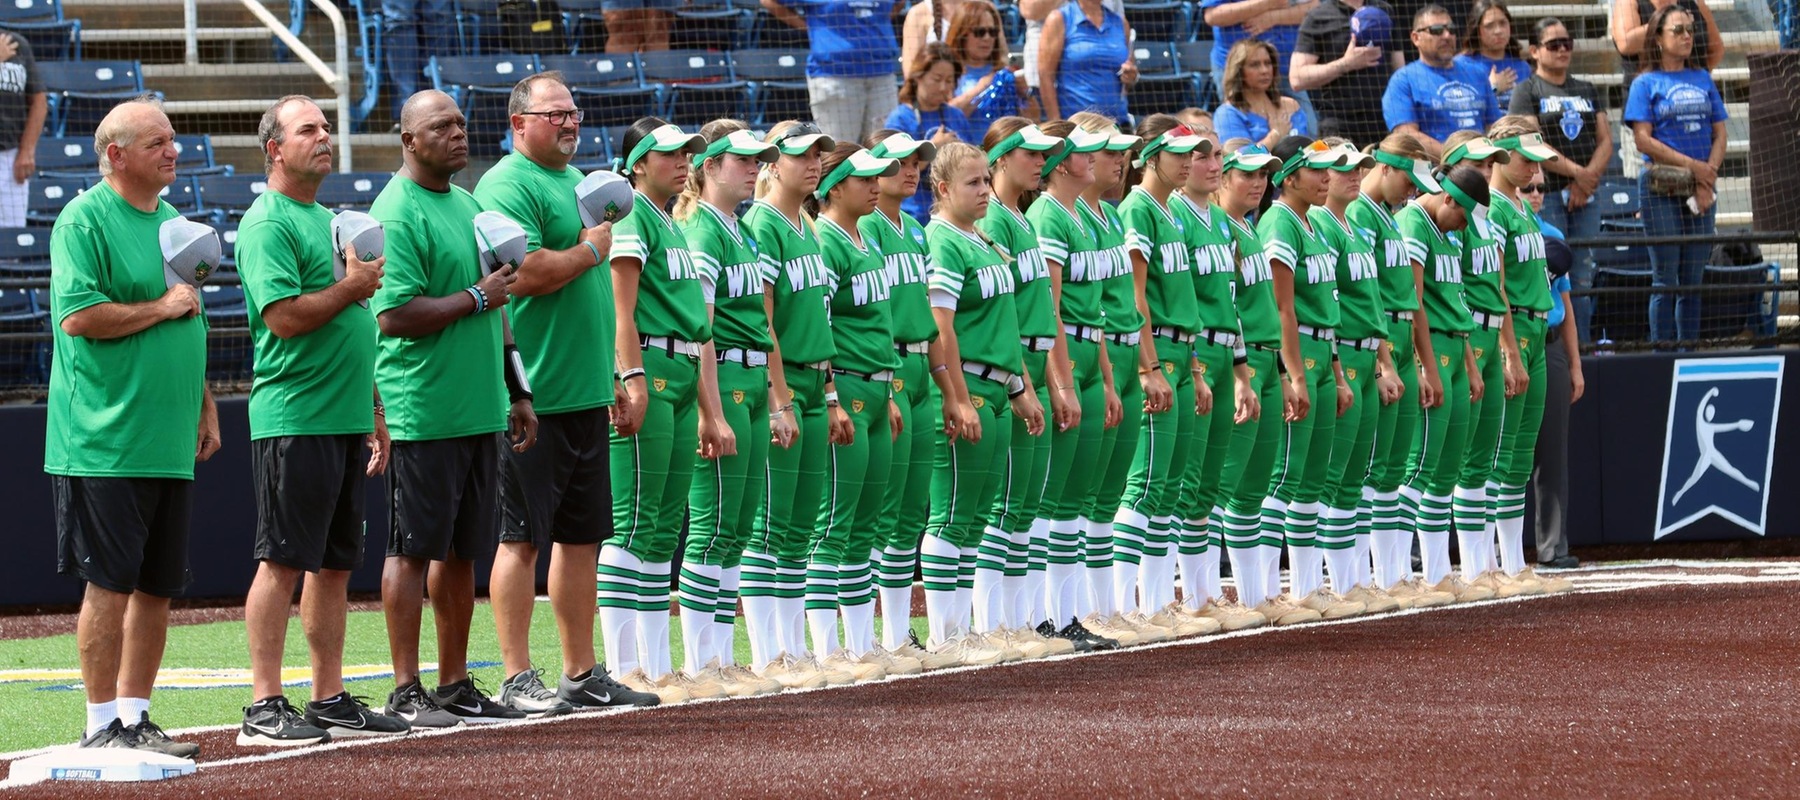 Copyright 2023; Wilmington University. All rights reserved. Photo by Dan Lauletta. Nay 27, 2023 vs. CSU San Marcos at NCAA DII Softball Championships.